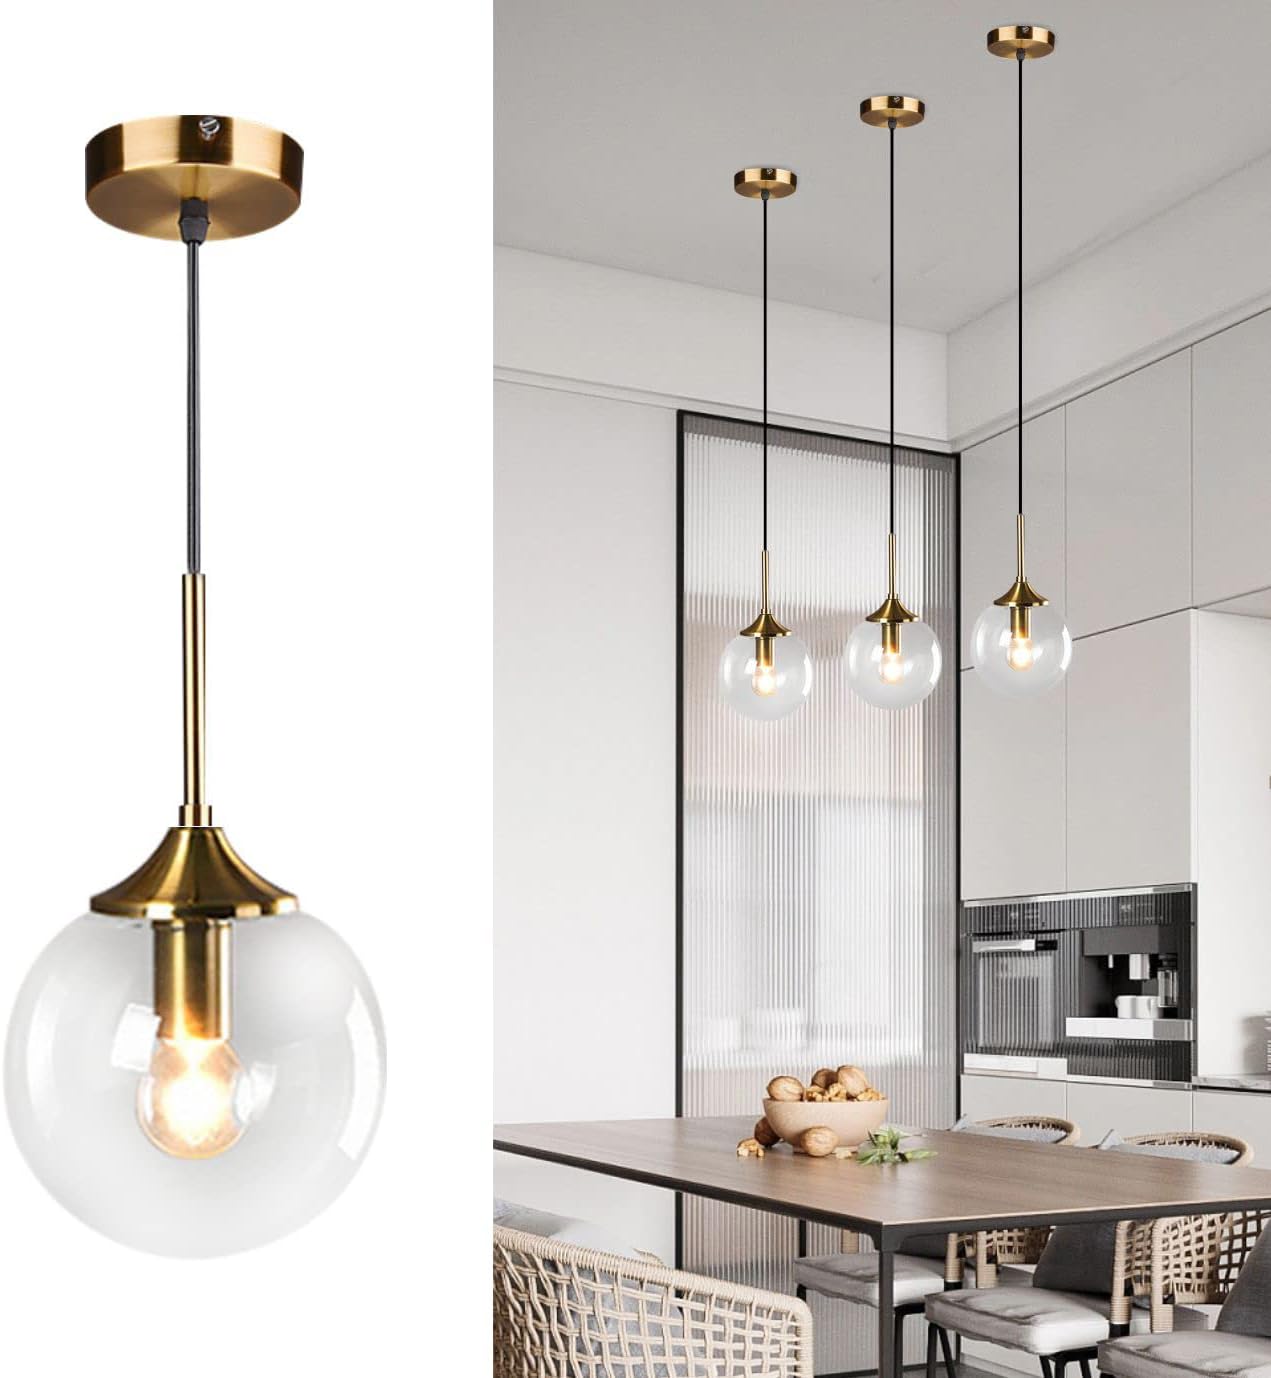 If you are looking for bright light then you need to buy different light bulb. Overall these pendants are very beautiful!